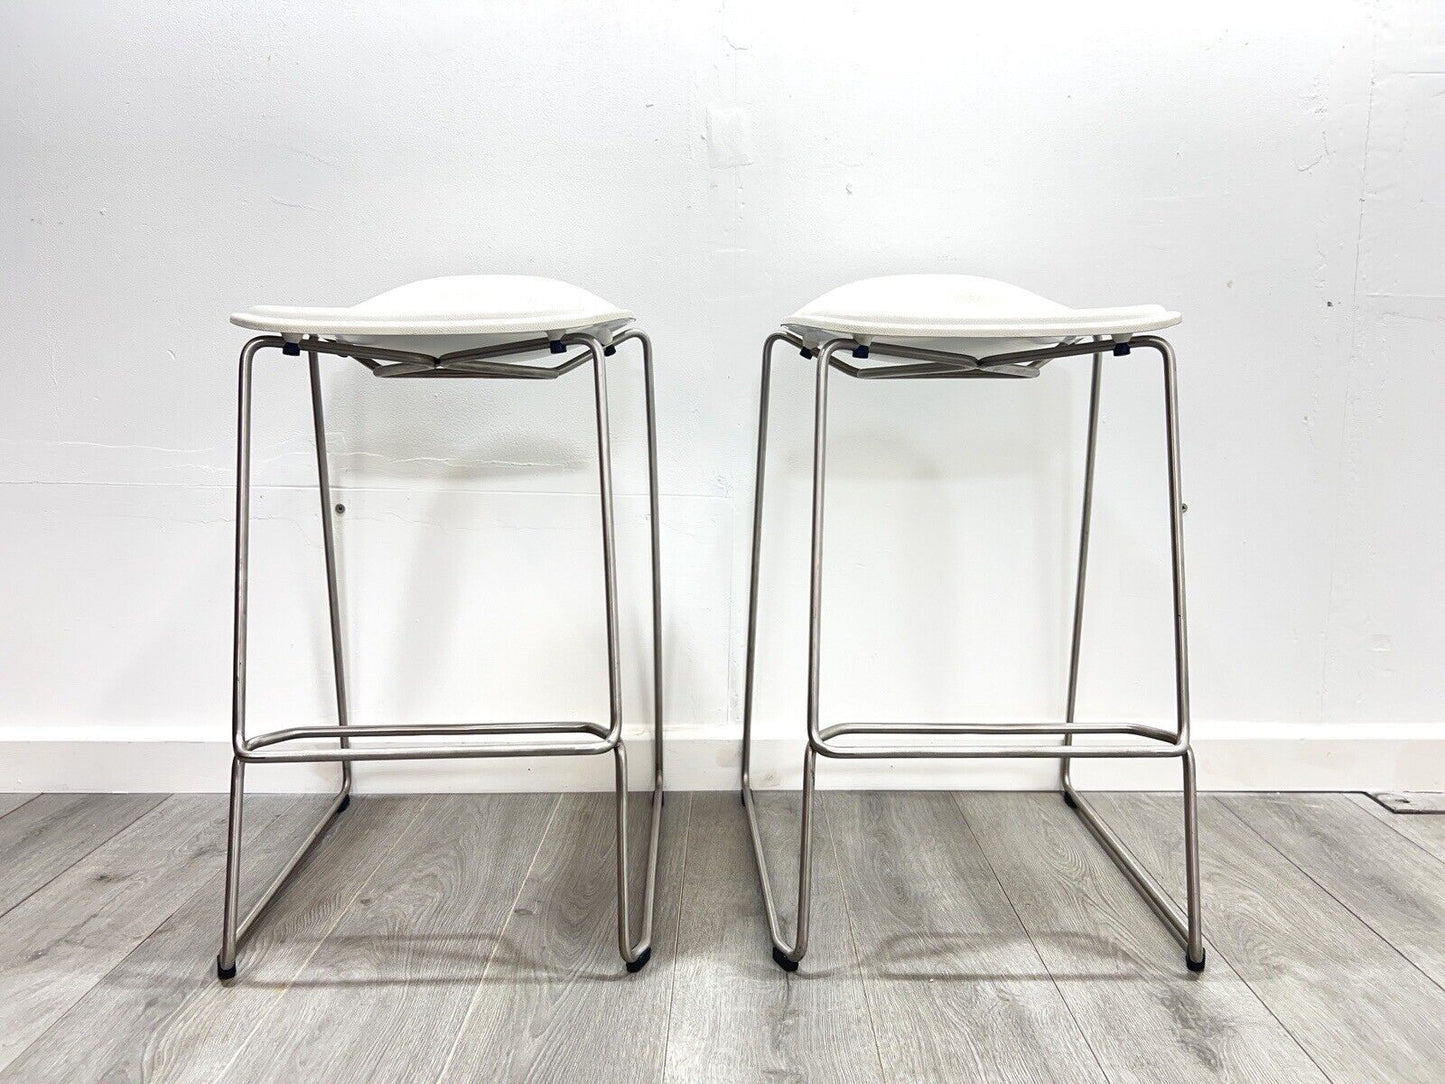 Pair of Modern White Leather Stools on a Stainless Steel Base